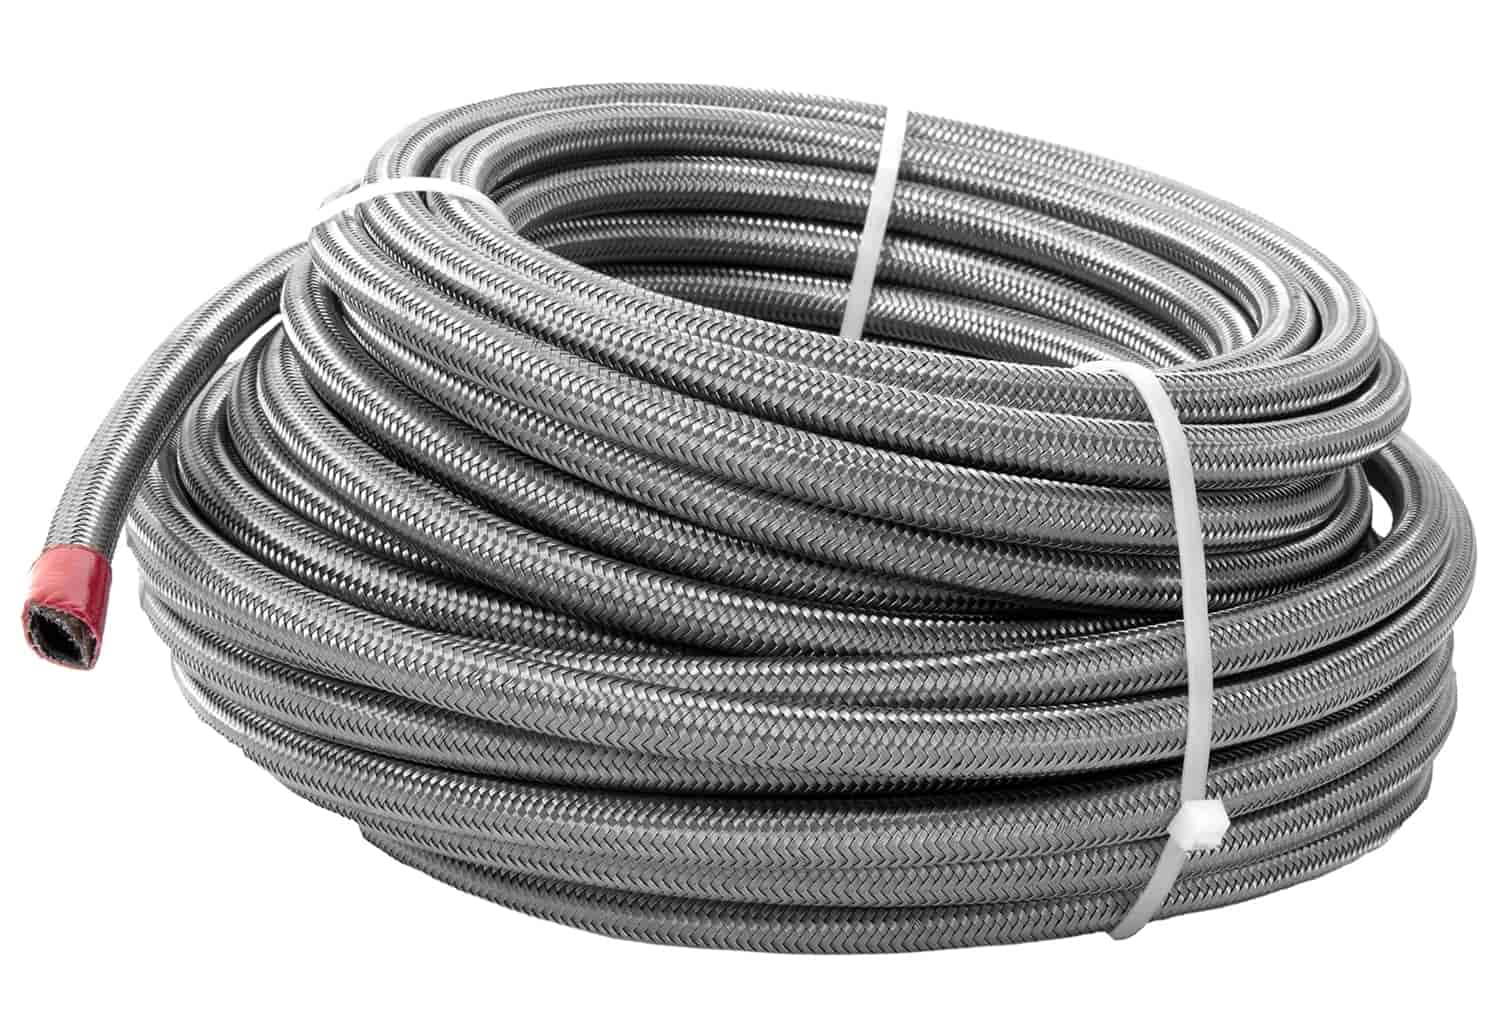 Braided Stainless Steel PTFE Fuel Hose -10 AN x 12 ft